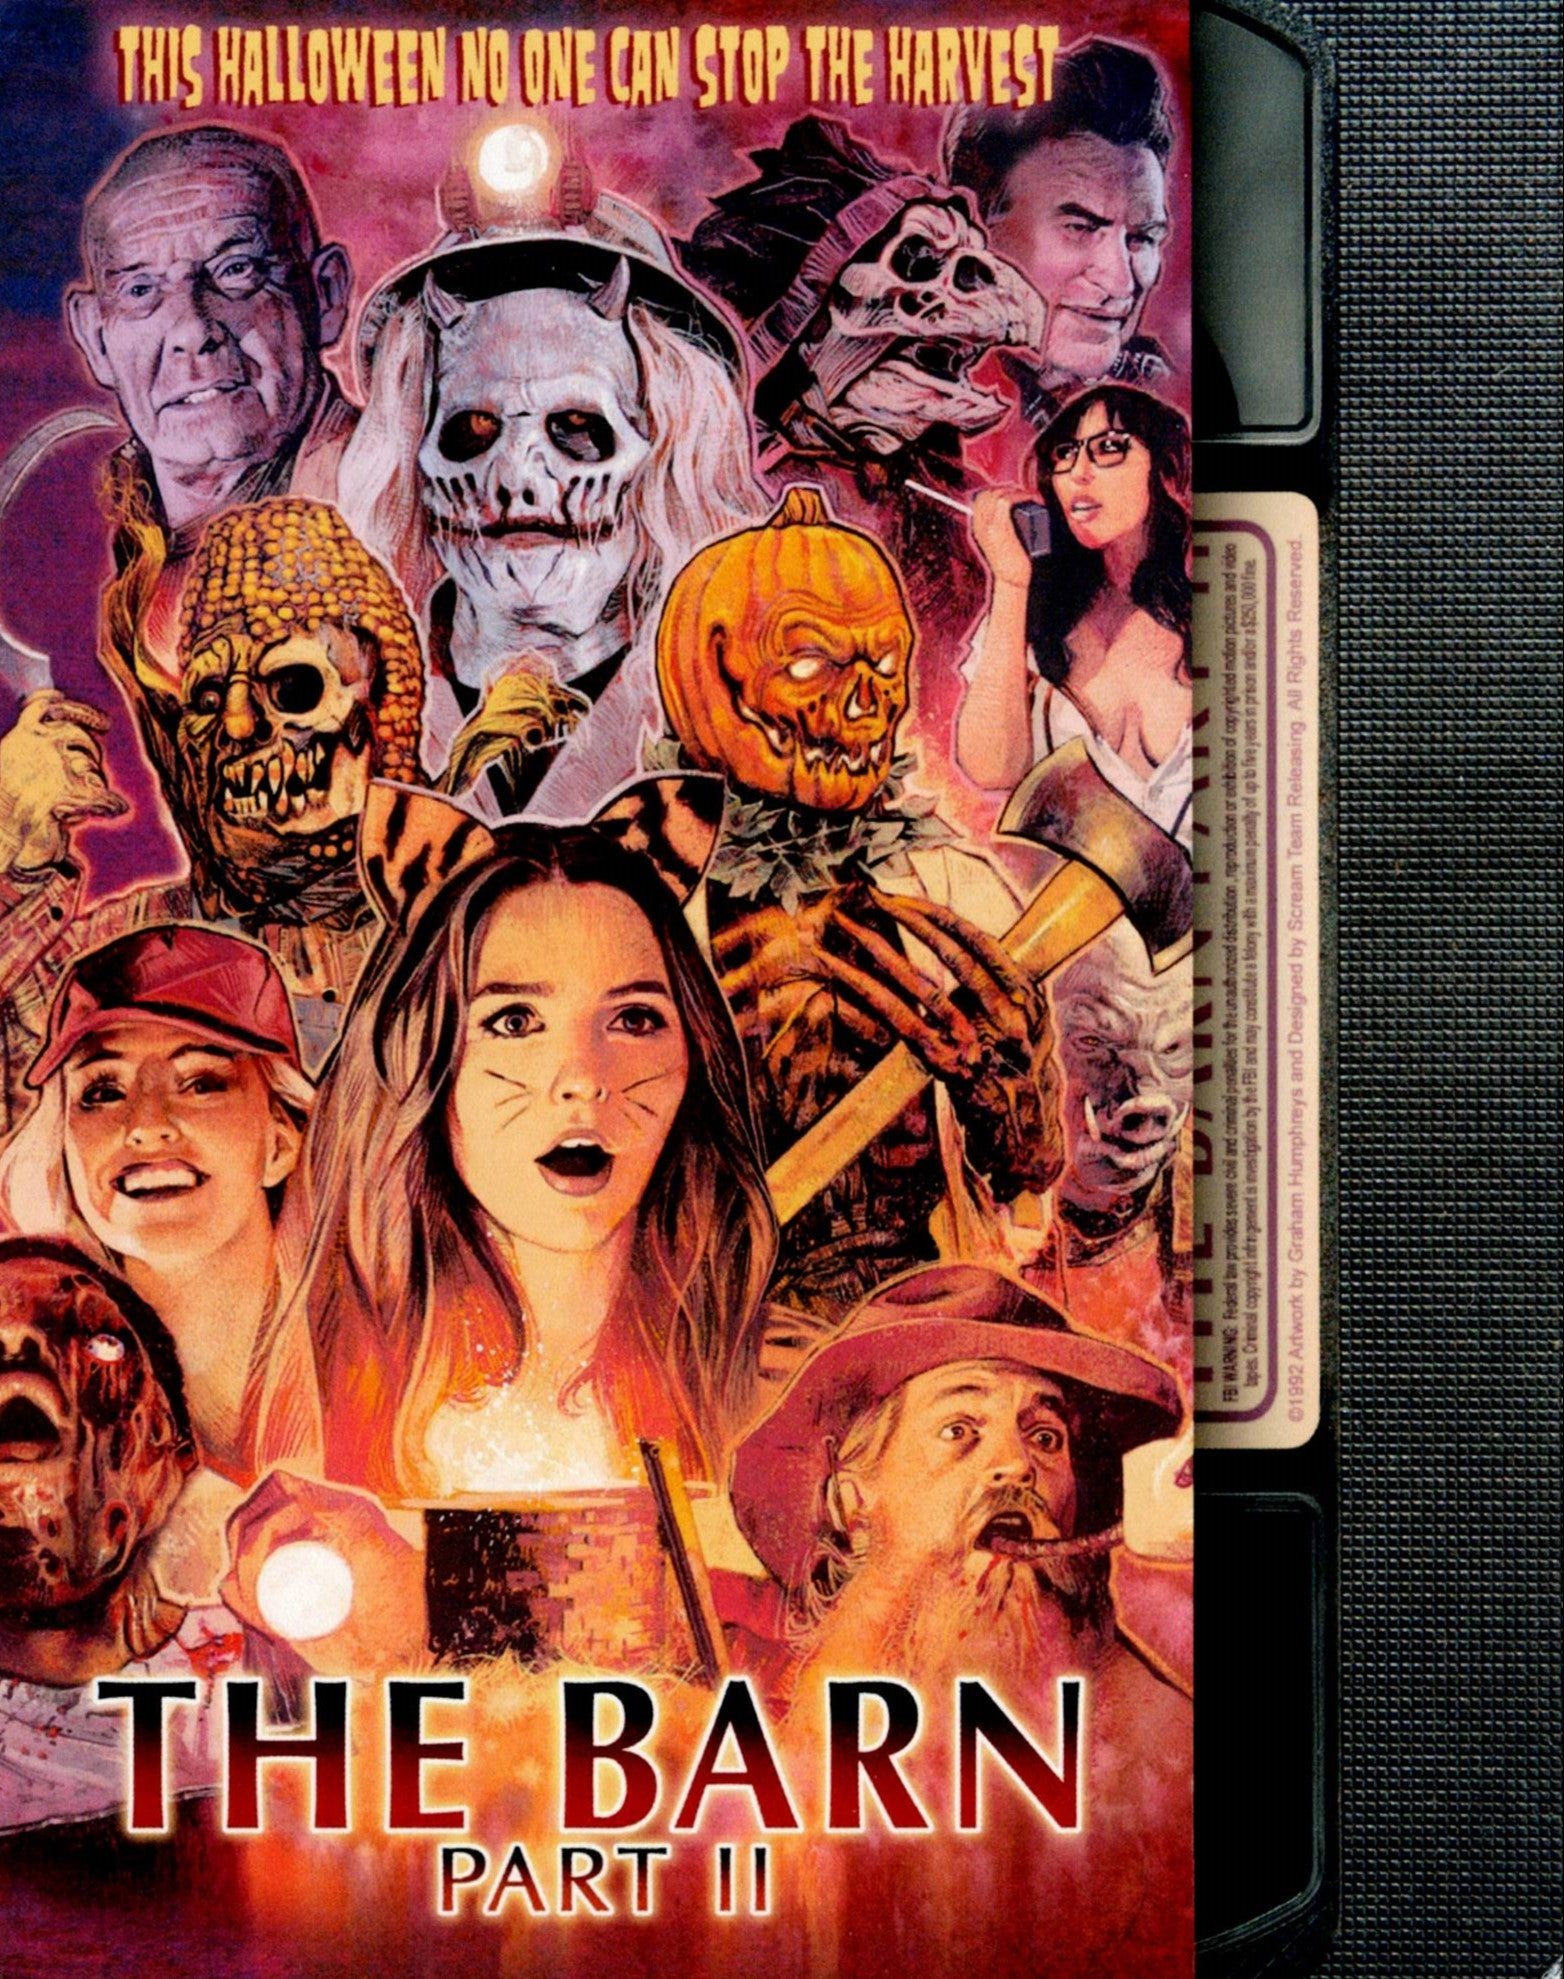 THE BARN PART II (LIMITED EDITION) BLU-RAY